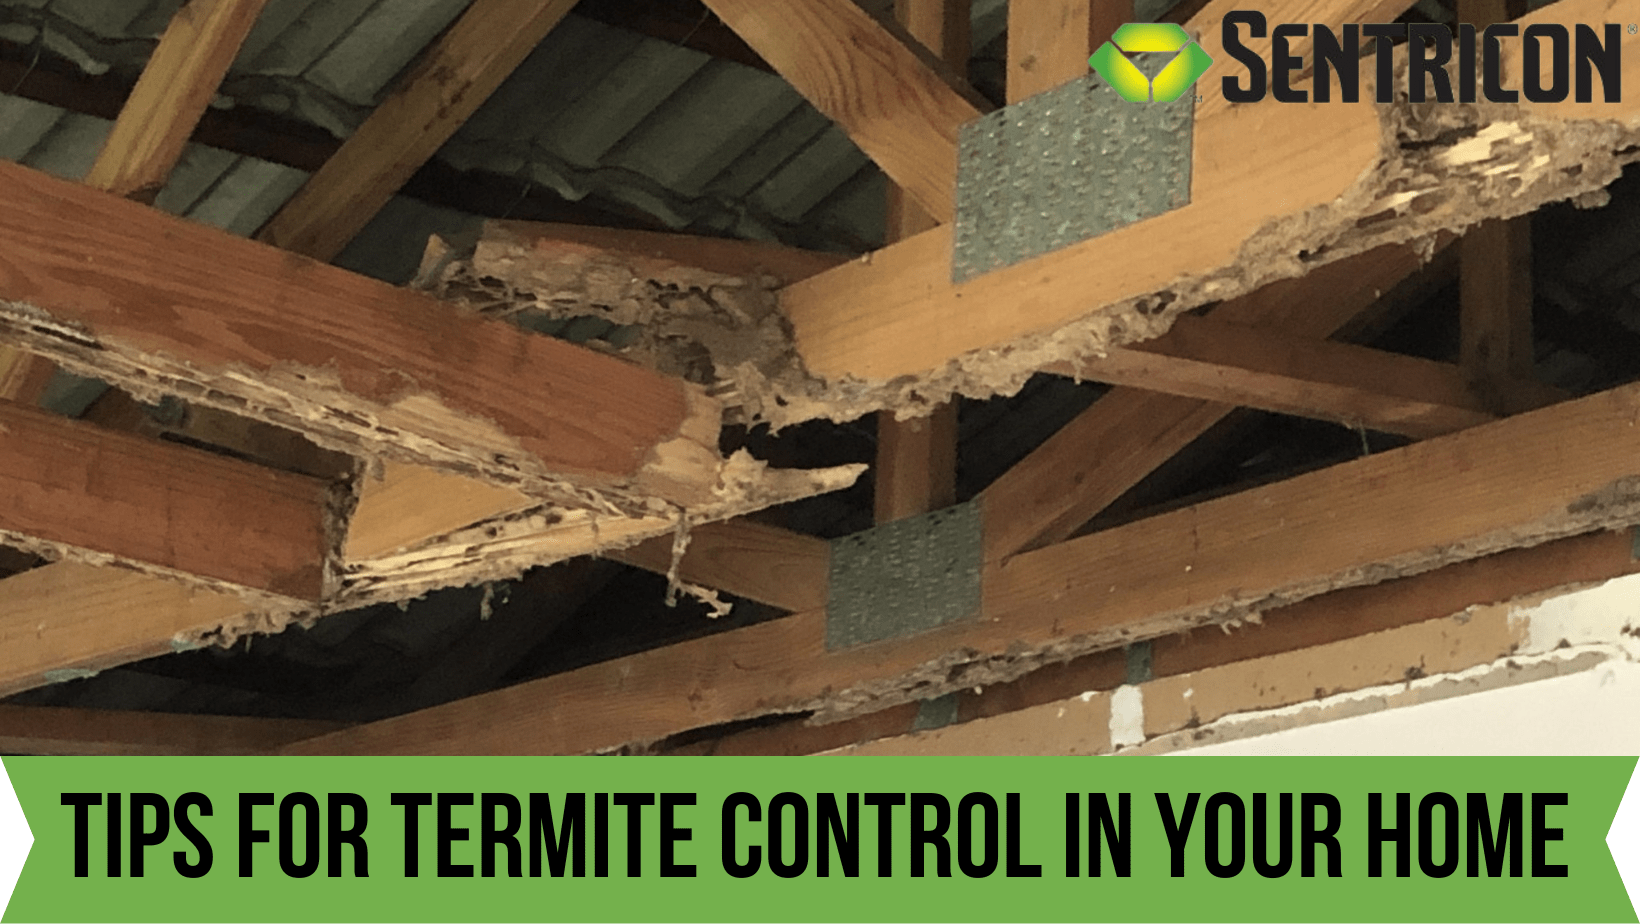 5 Tips for Termite Control in Your Home